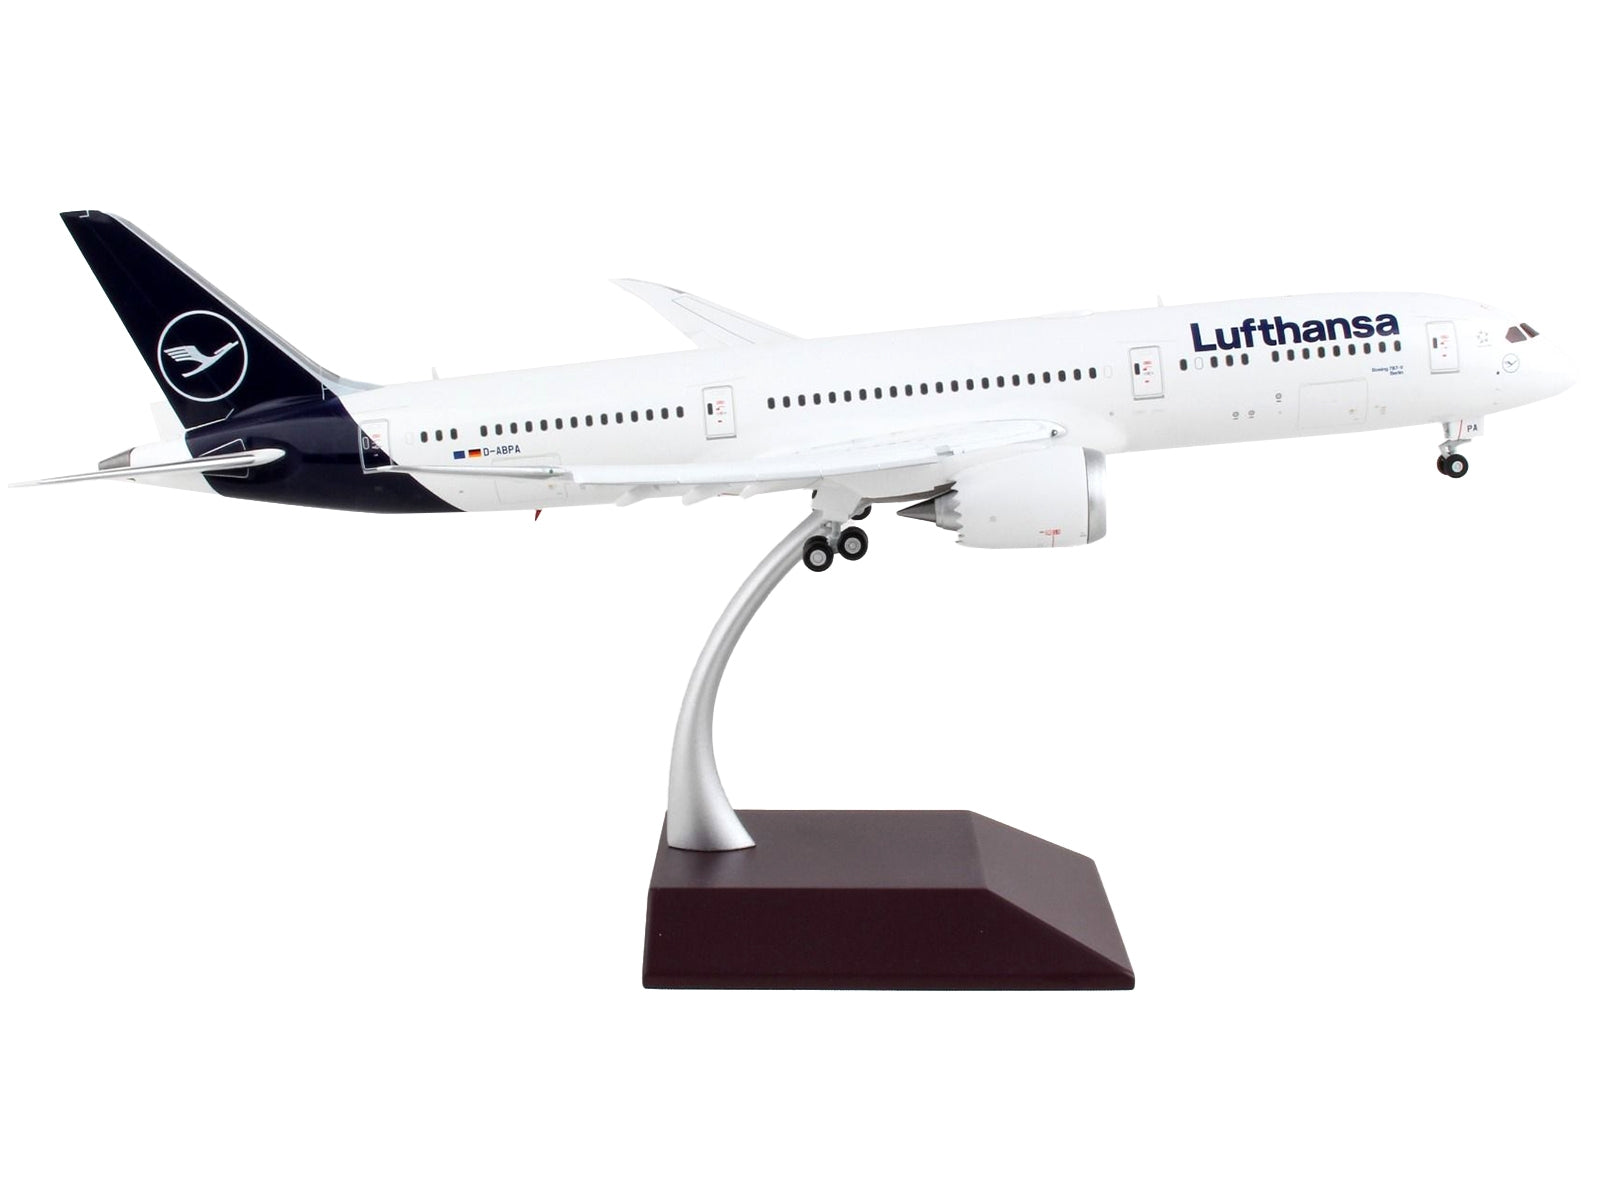 Boeing 787-9 Commercial Aircraft with Flaps Down "Lufthansa" White with Blue Tail "Gemini 200" Series 1/200 Diecast Model Airplane by GeminiJets